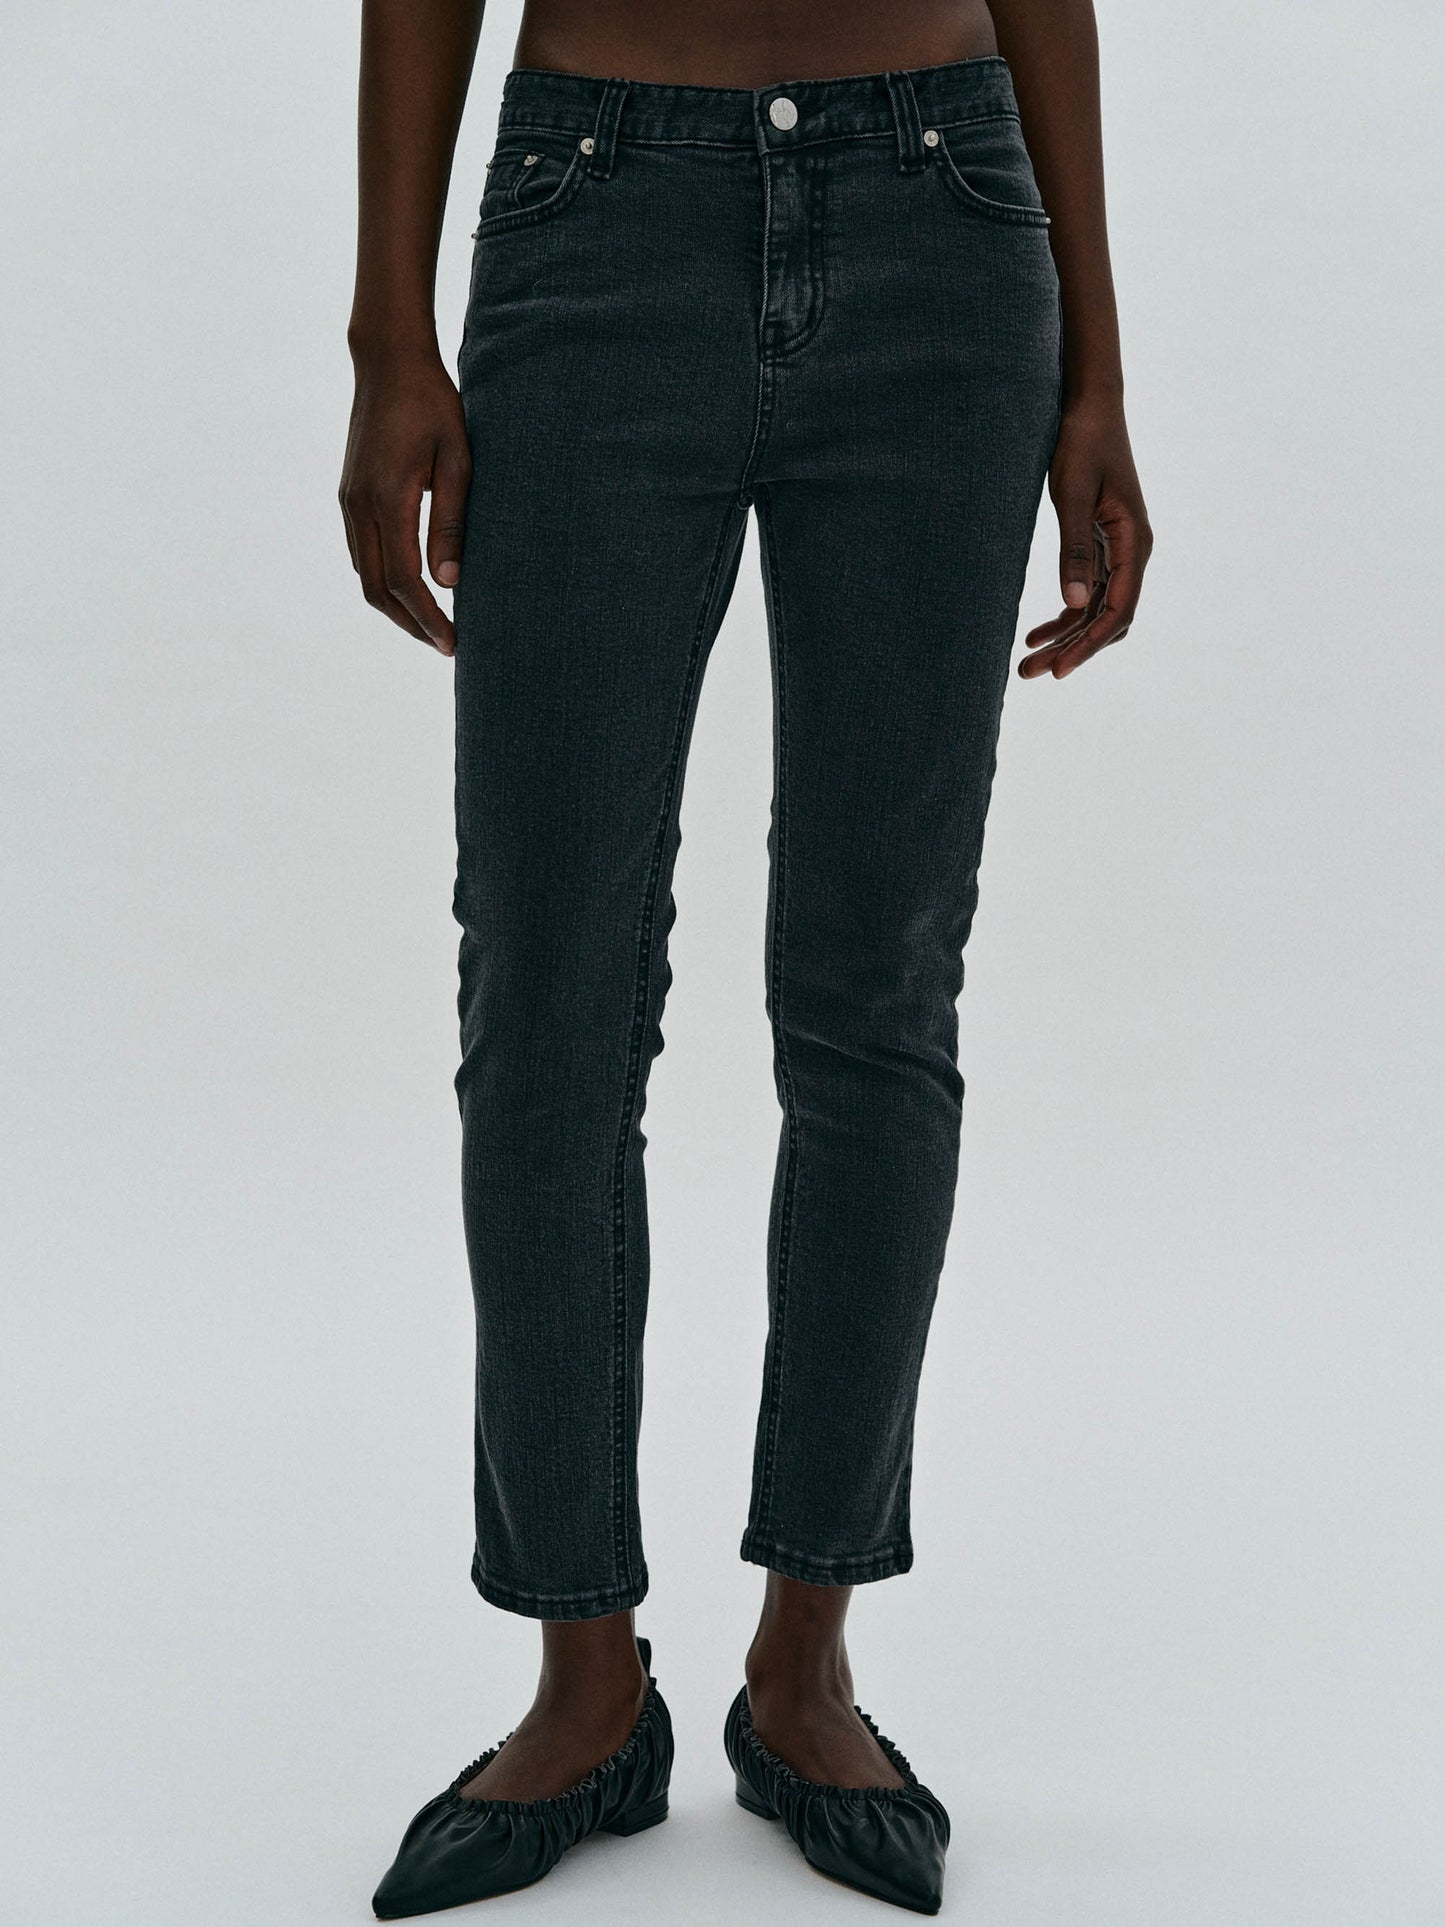 Low Rise Skinny Jeans, Black Washed